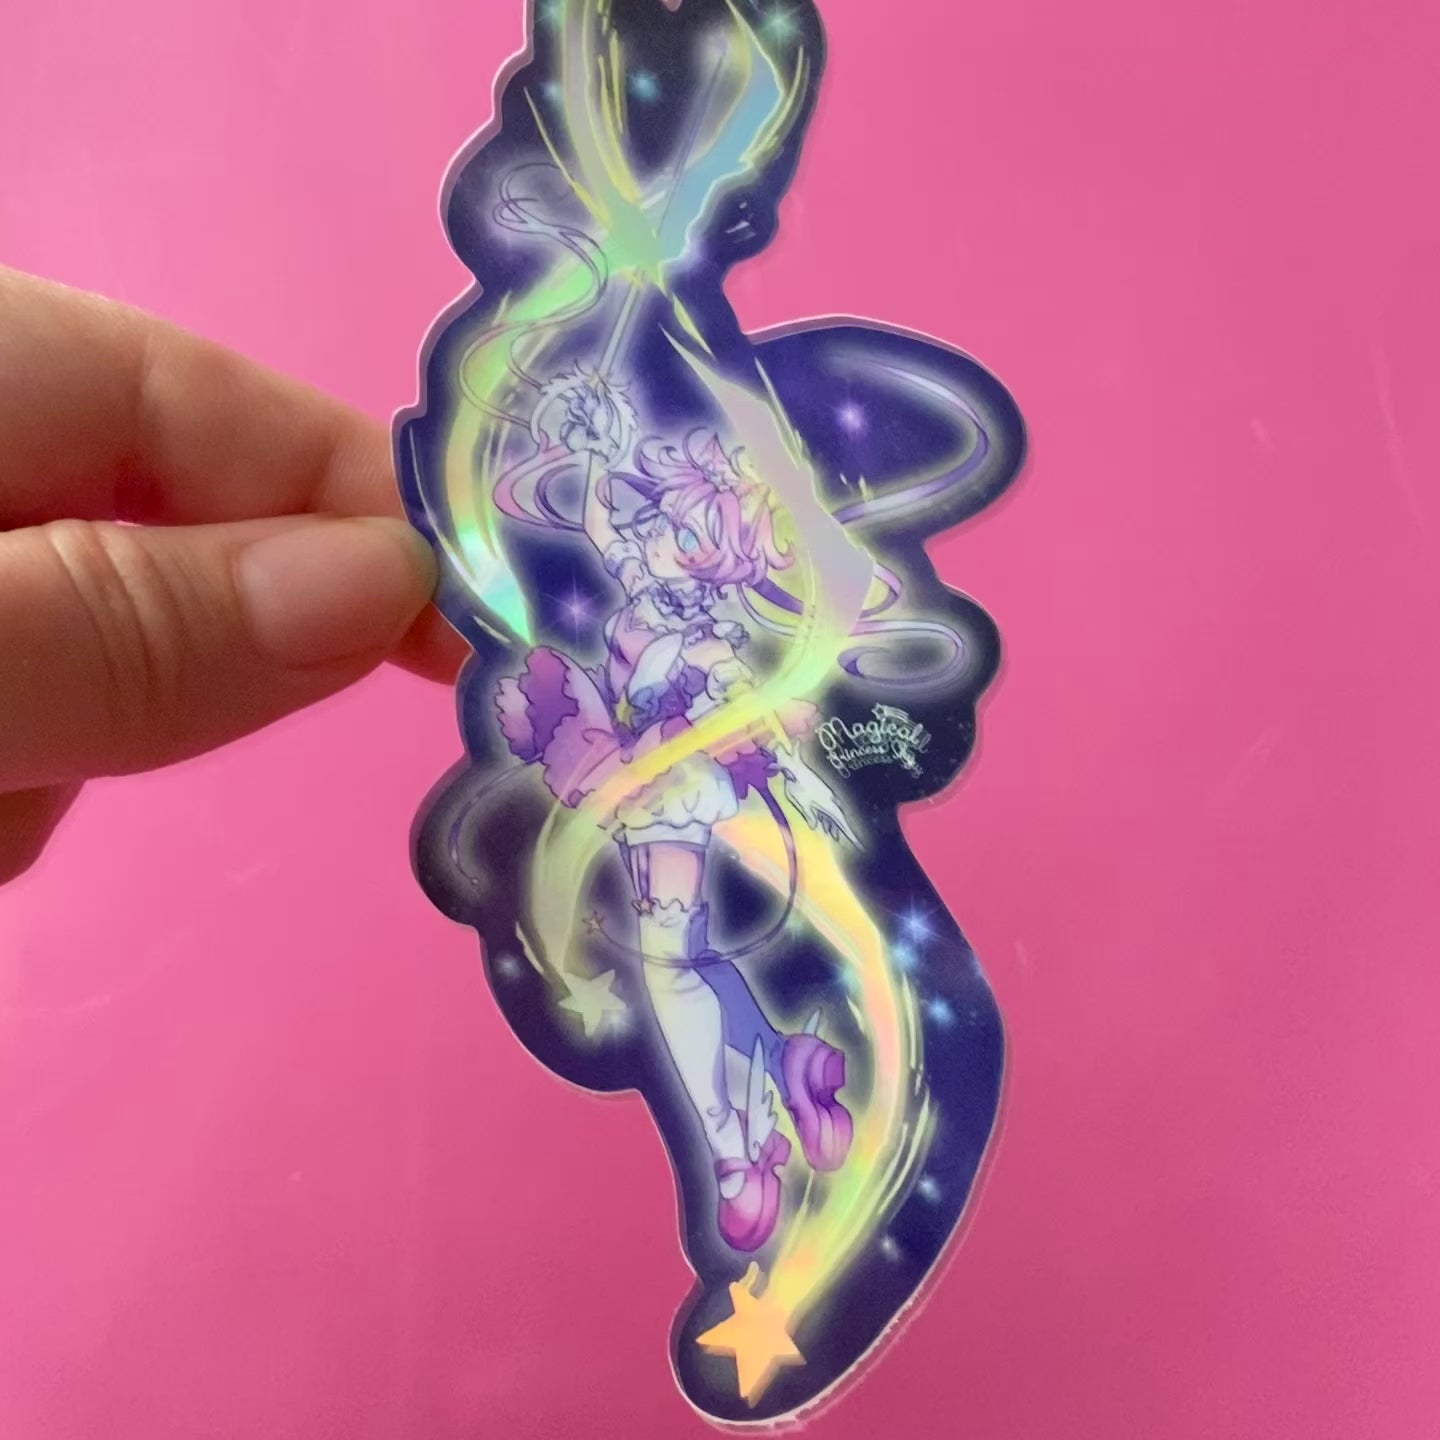 Magical Princess Sky transformation shooting stars vinyl holographic sticker 5 x 2.5 inches